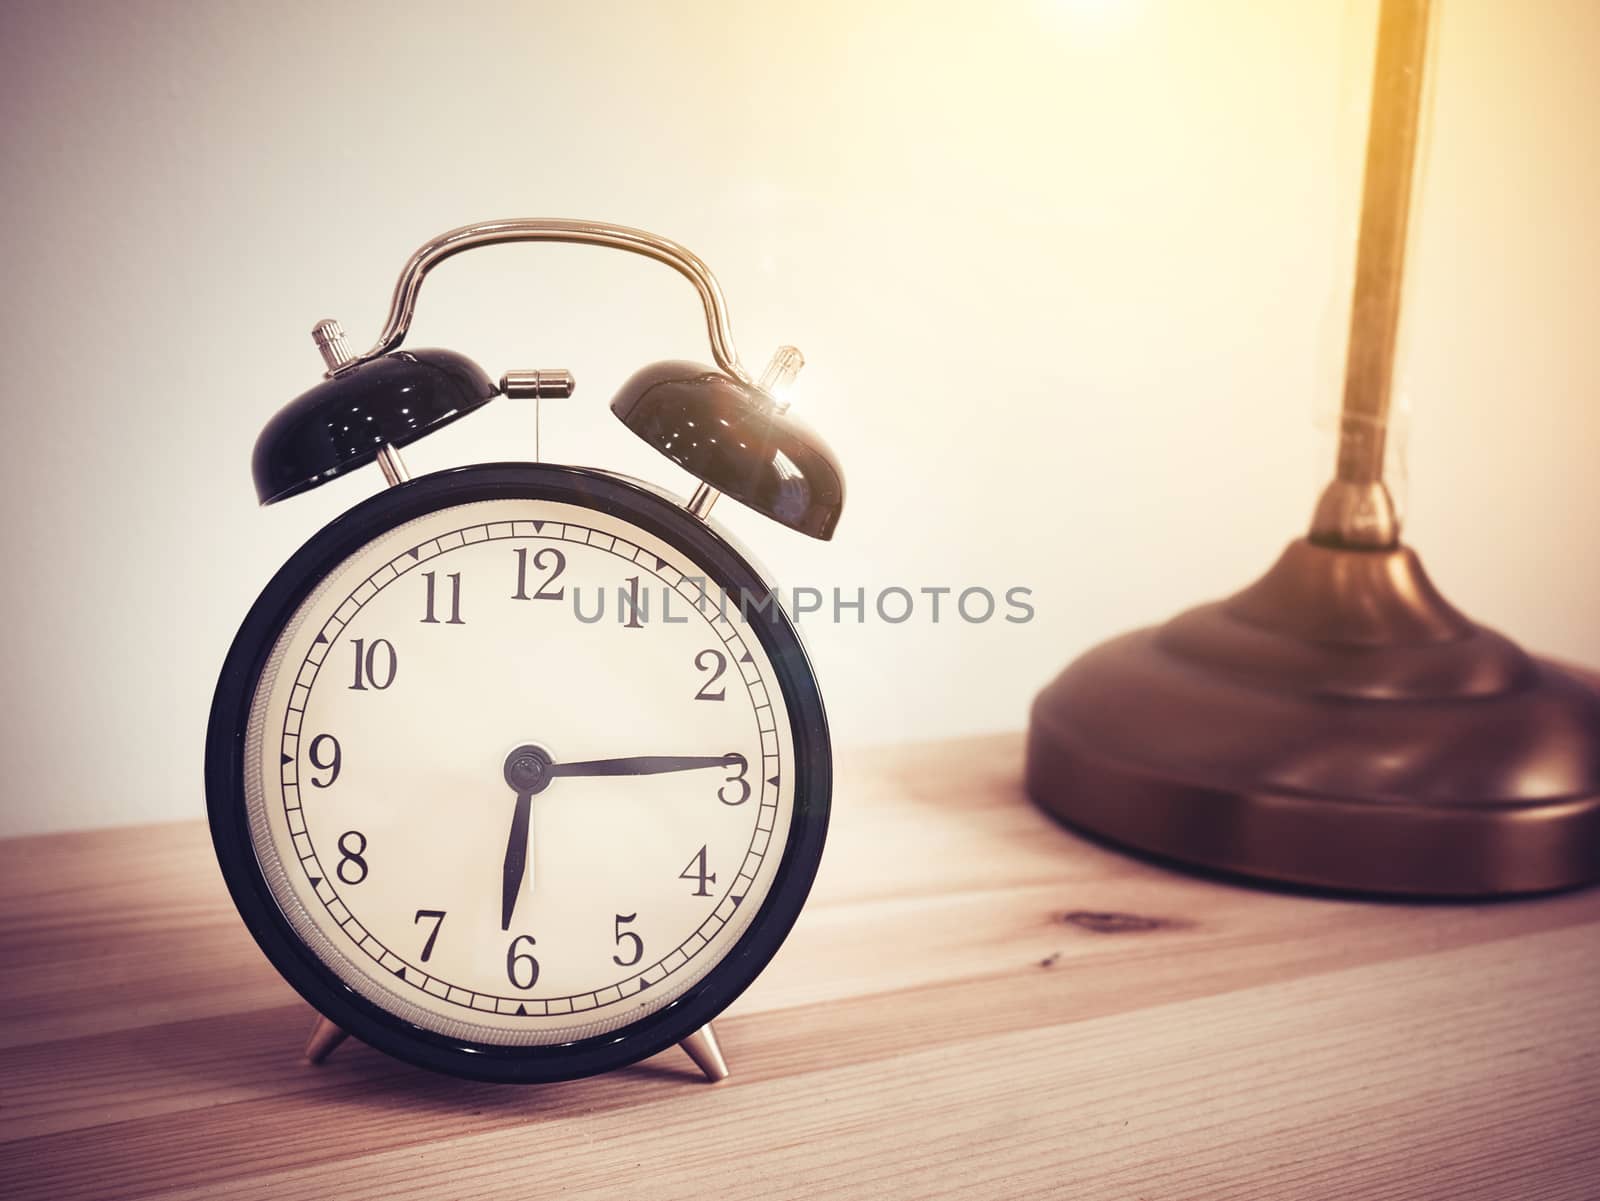 Closeup retro alarm clock on wooden table with copy space, retro style